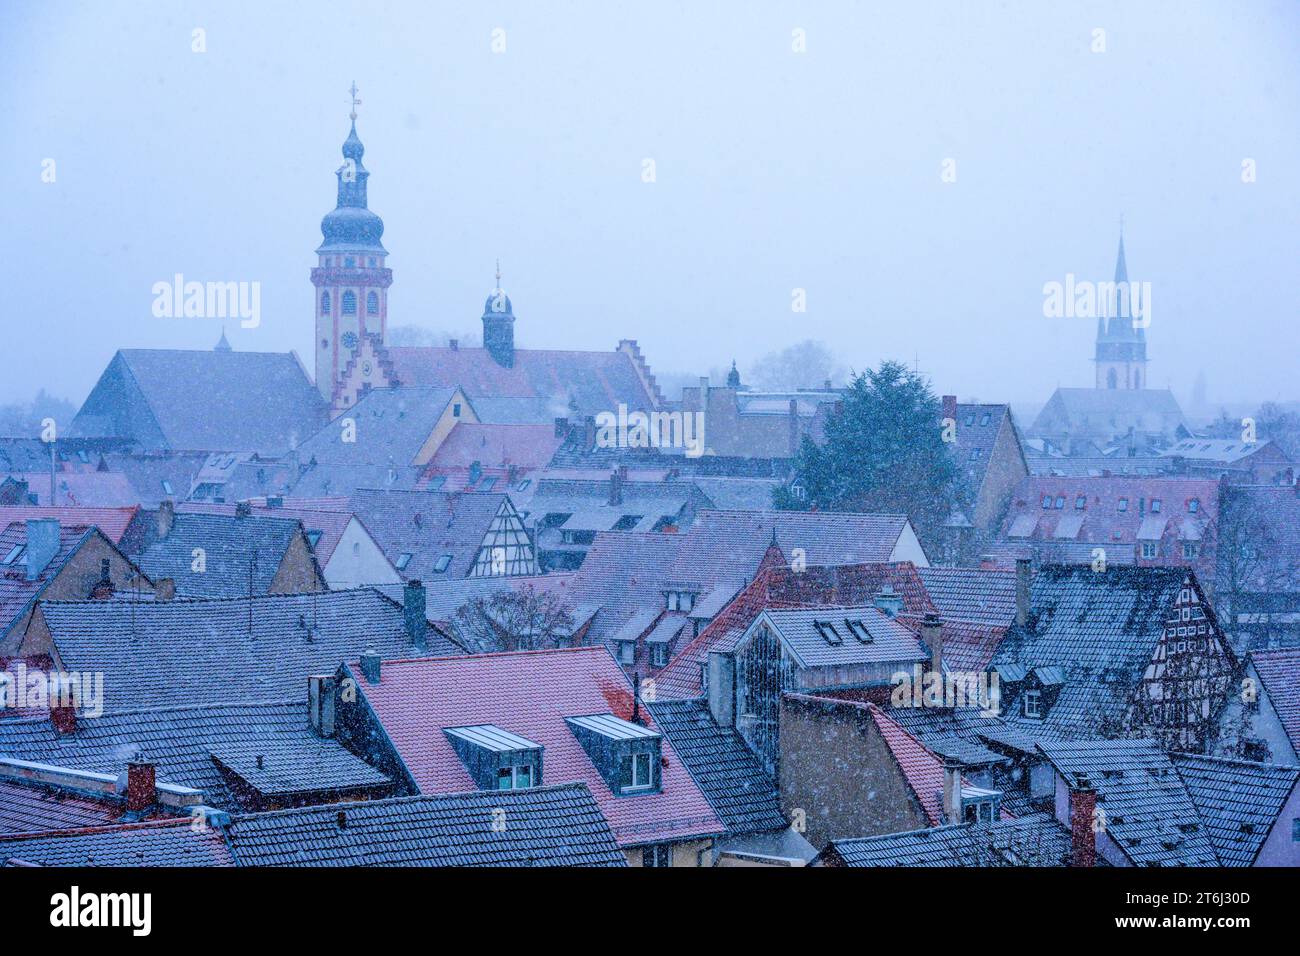 Germany, Baden-Wuerttemberg, Karlsruhe, Durlach, snow shower over the old town. Stock Photo